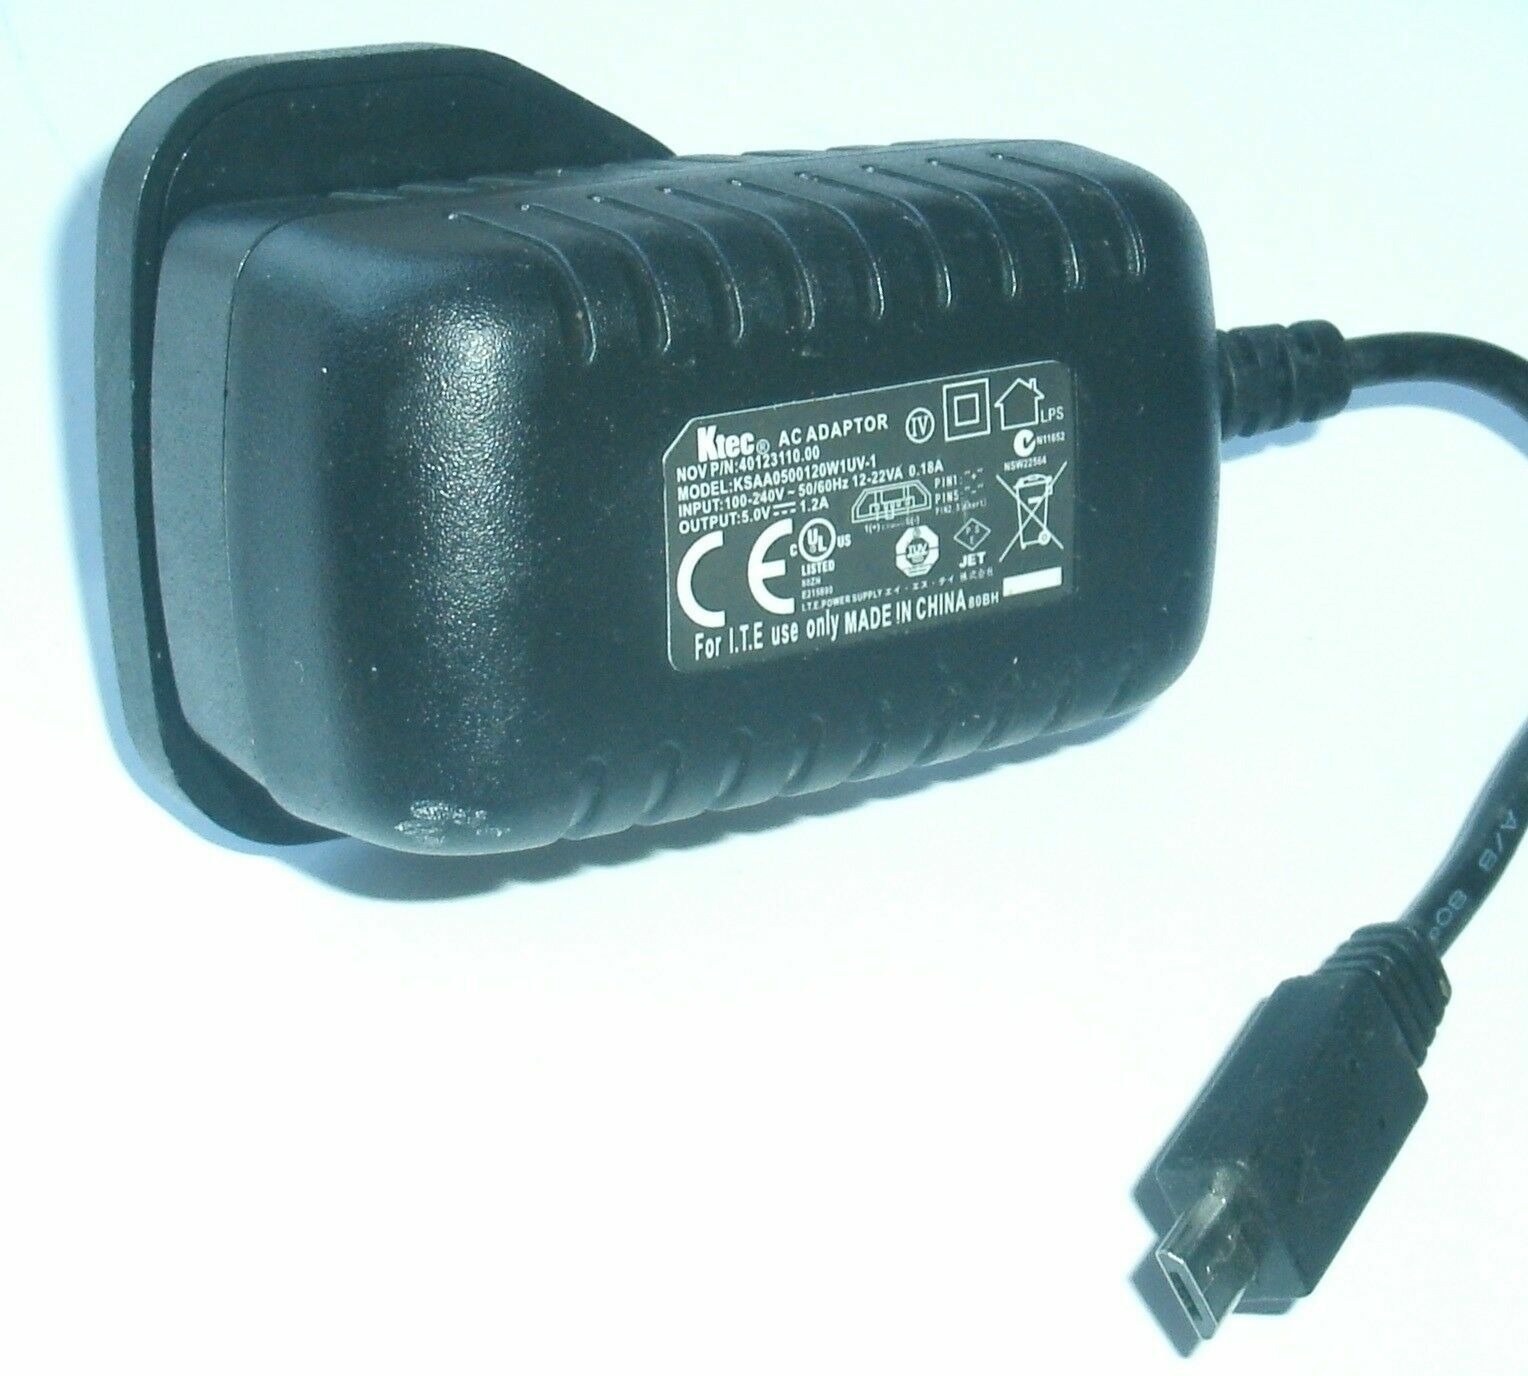 *Brand NEW*KTEC KSAA0500120W1UV-1 UK PLUG 40123110.00 Great Condition 5.0V 1.2A AC ADAPTER